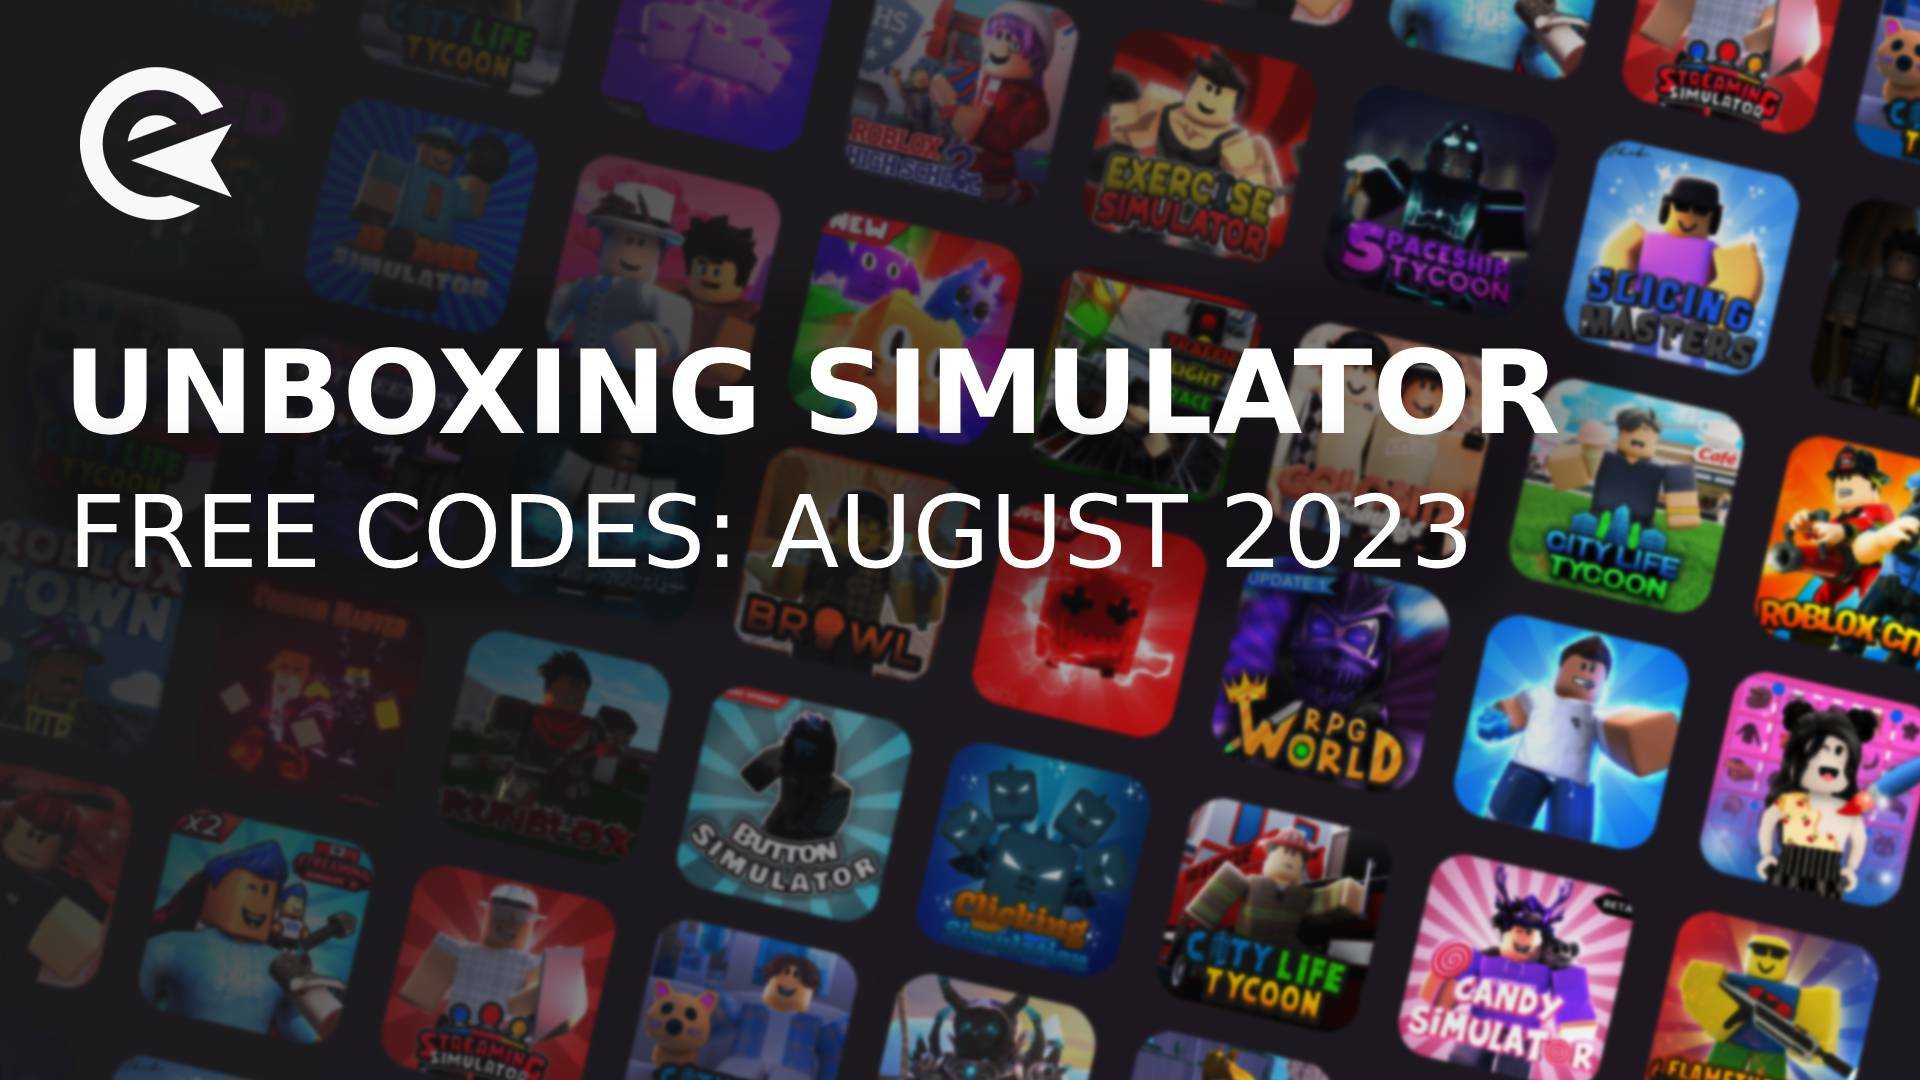 Unboxing simulator codes (October 2023) - Free gems and hats!